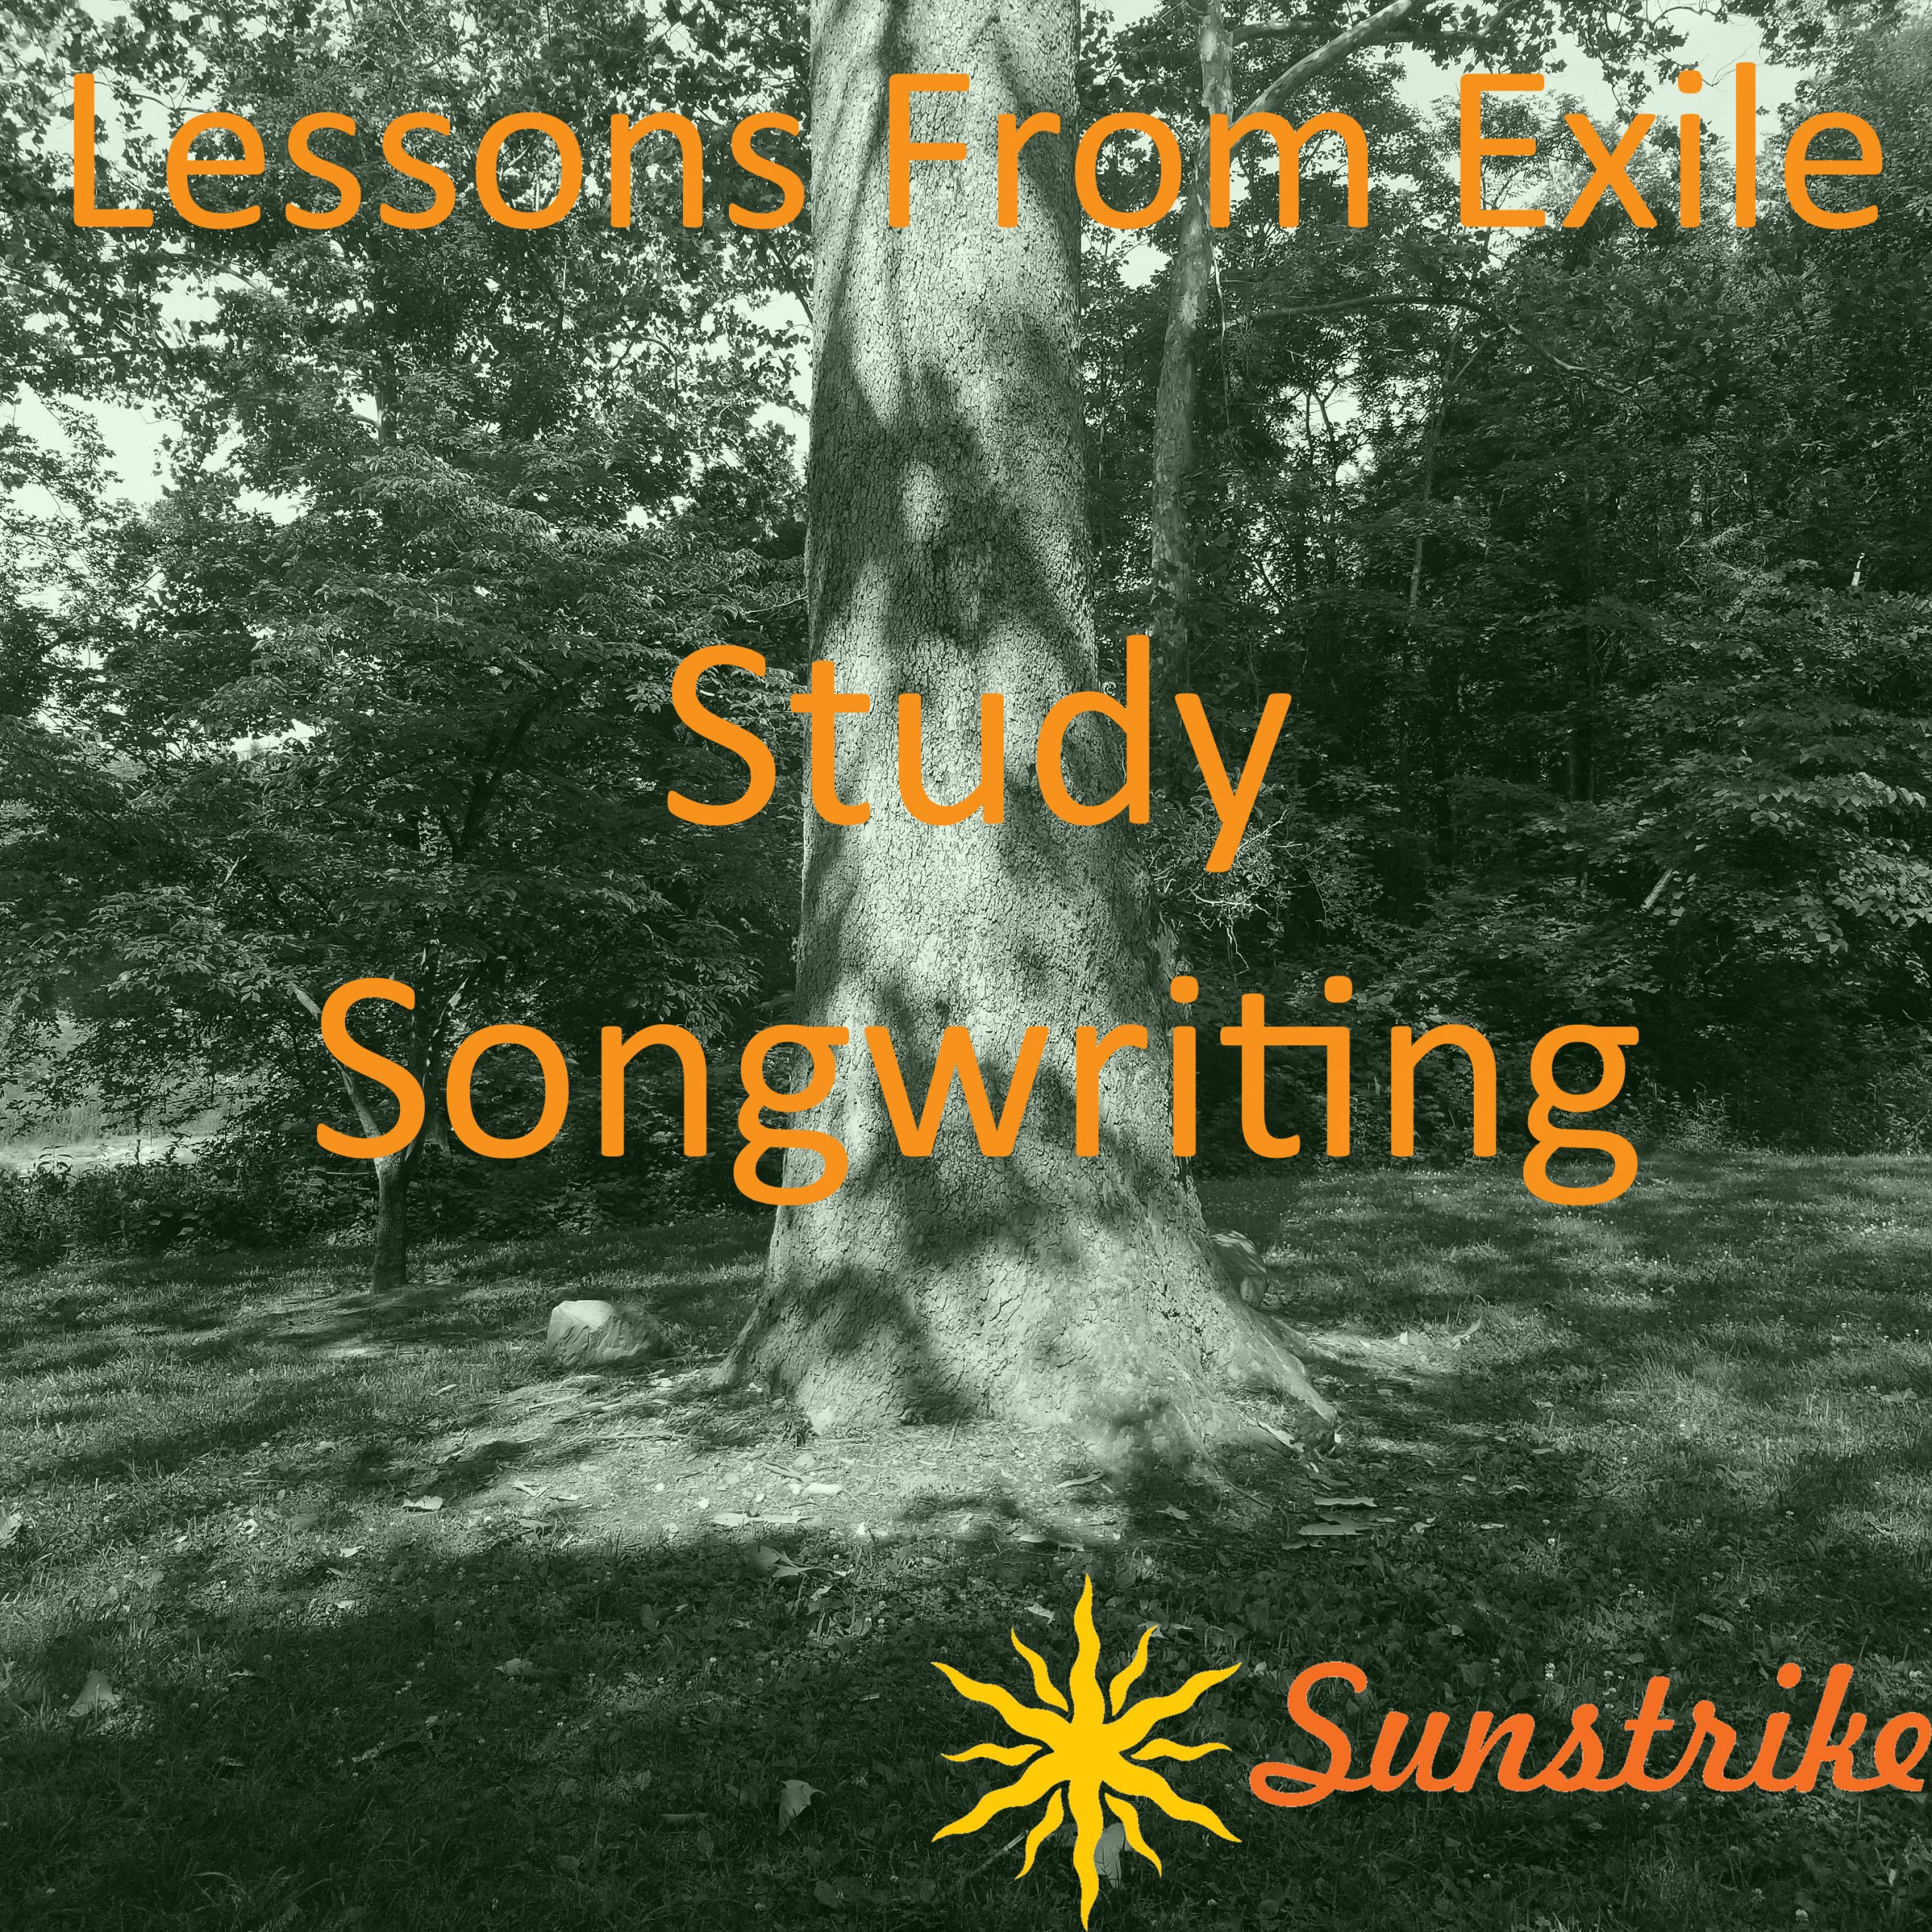 Lessons from Exile #79: Study Songwriting